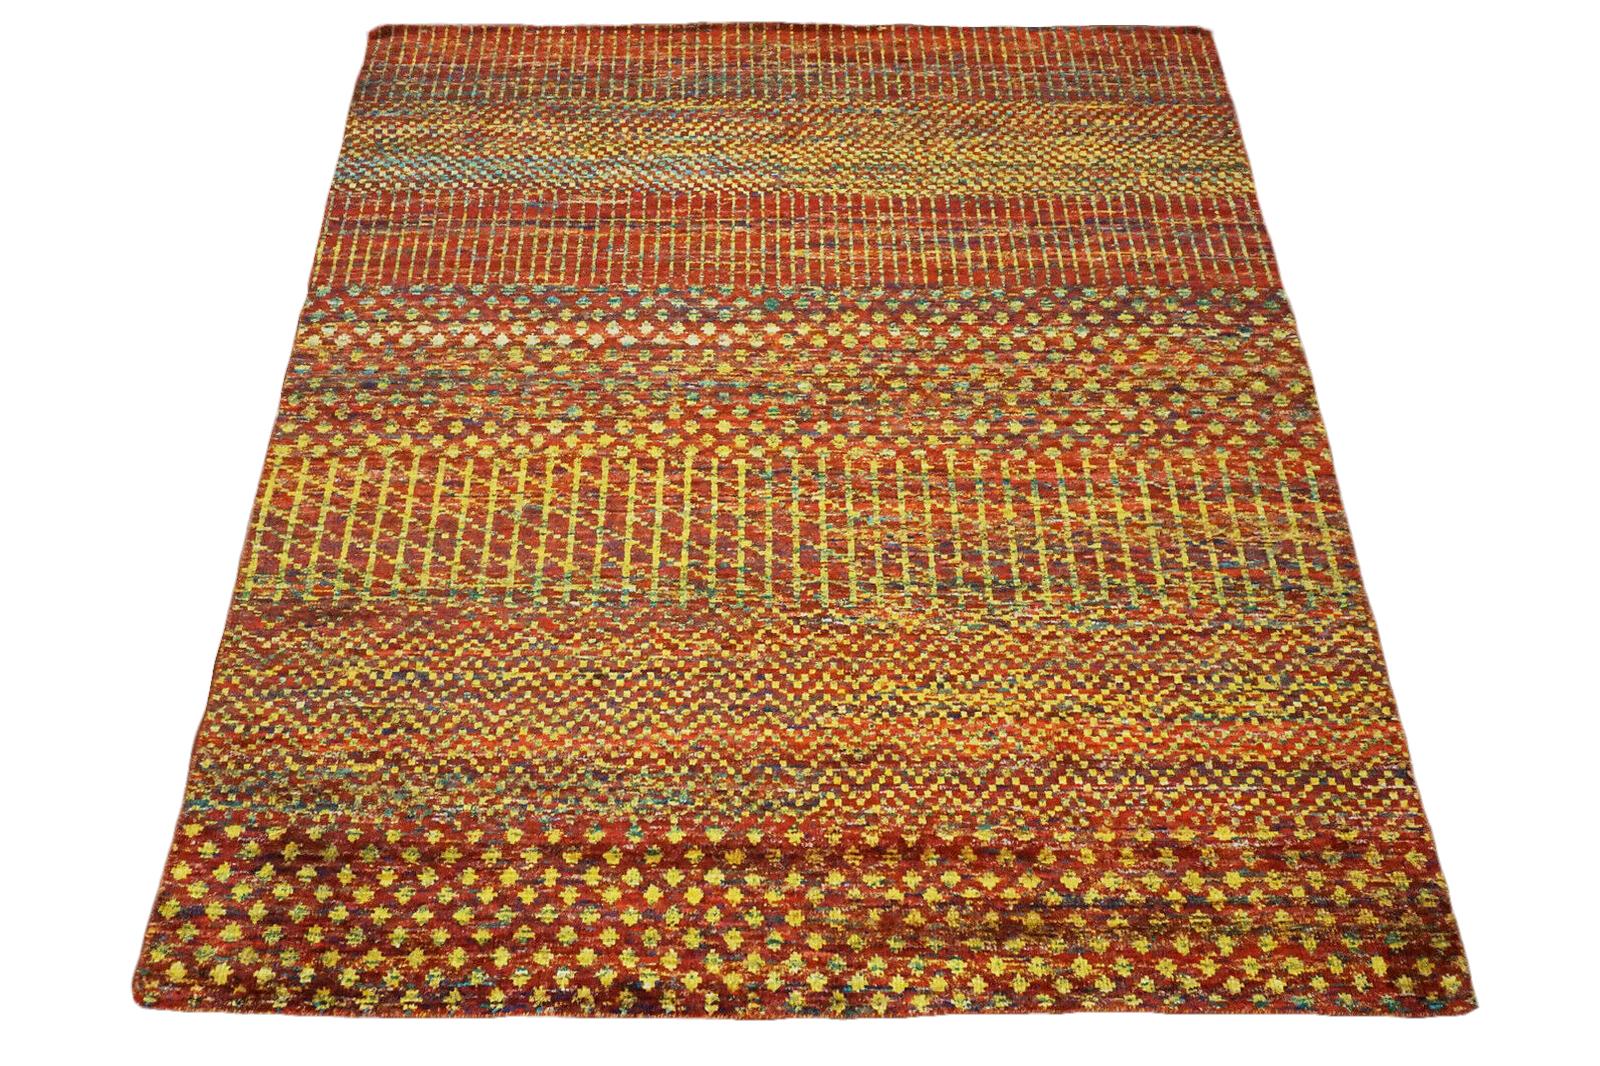 Hand-knotted bamboo silk pile on a cotton foundation.

Dimensions: 8'4